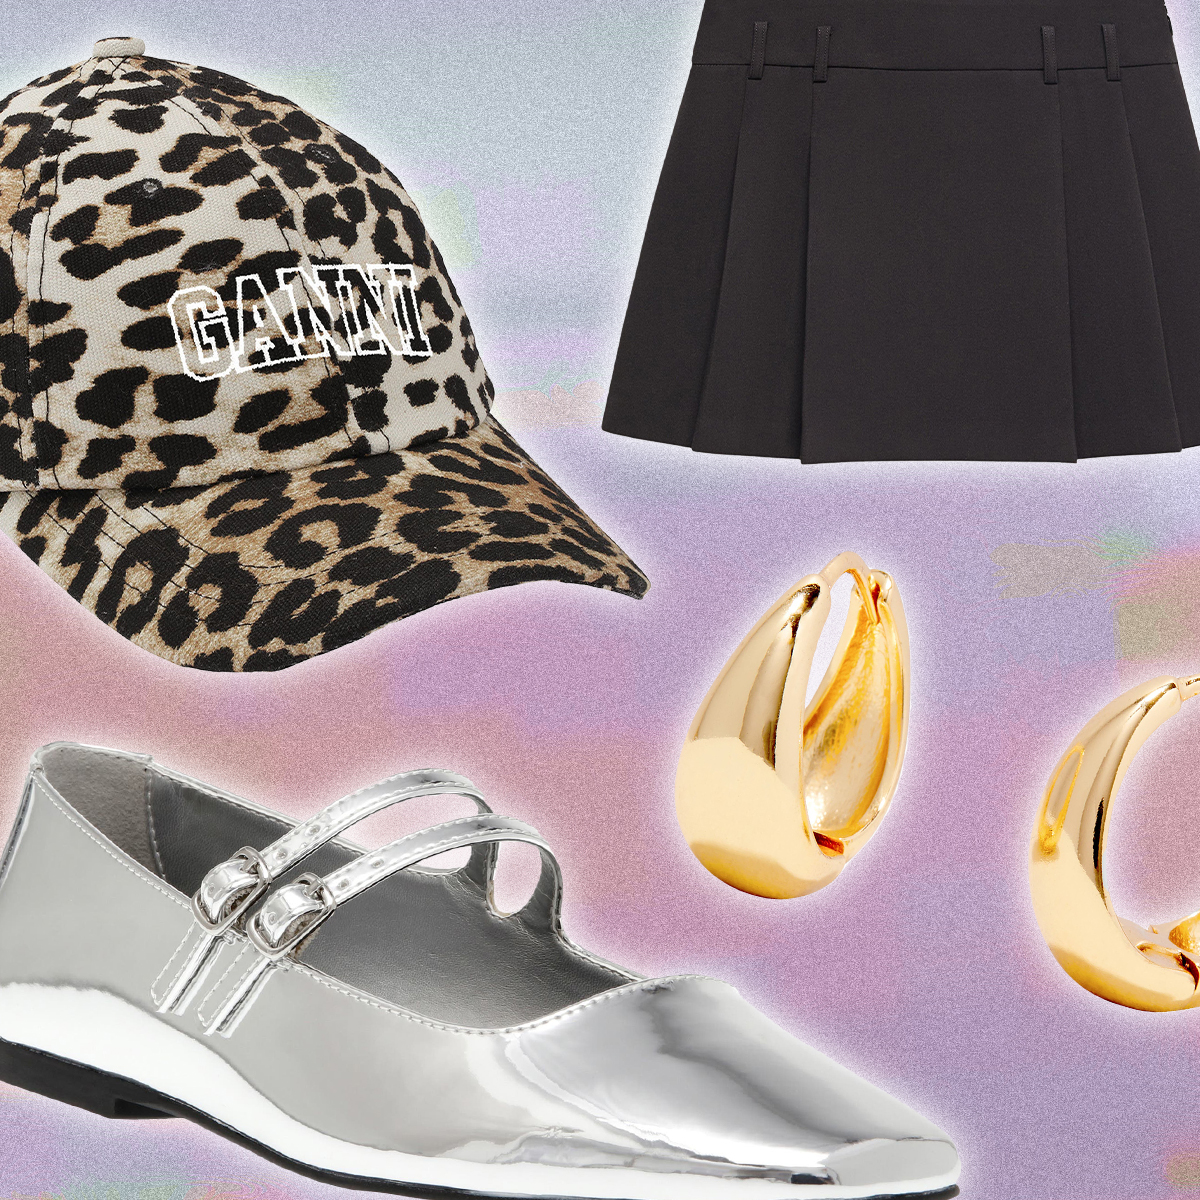 I Spent an Afternoon Browsing Nordstrom: 20 Affordable Buys You Need for Spring